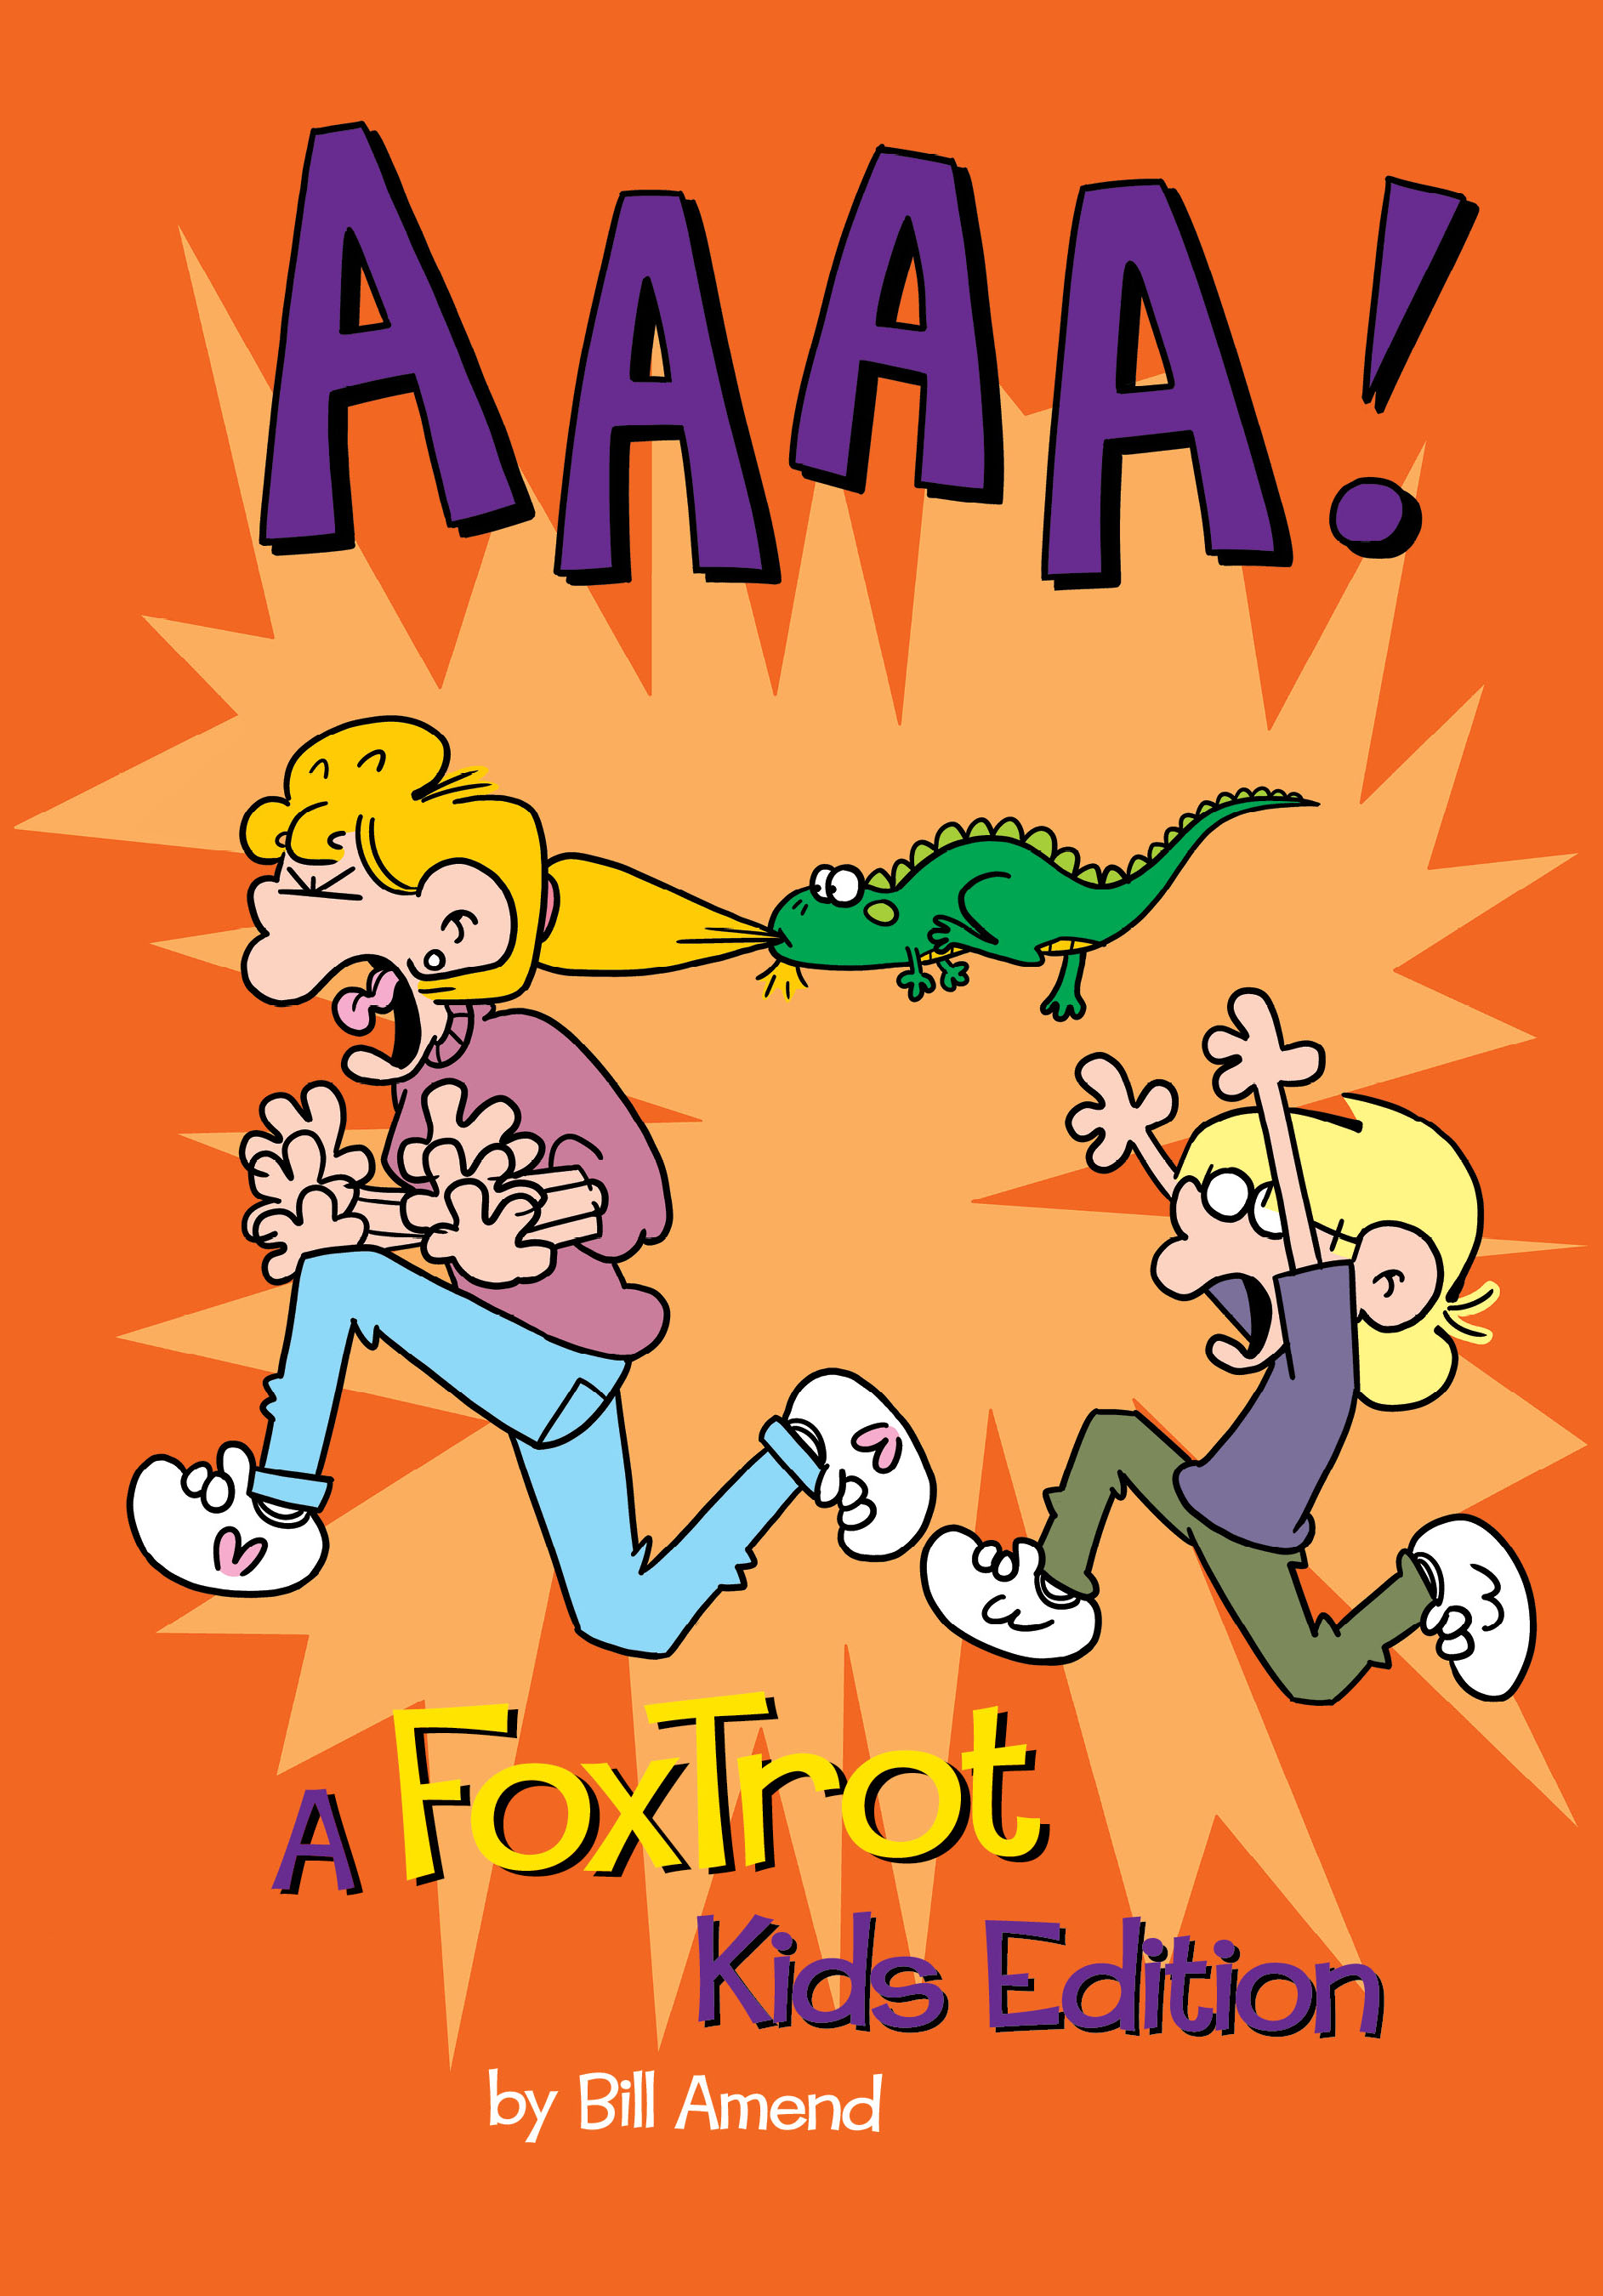 AAAA! A FoxTrot Kids Edition cover image